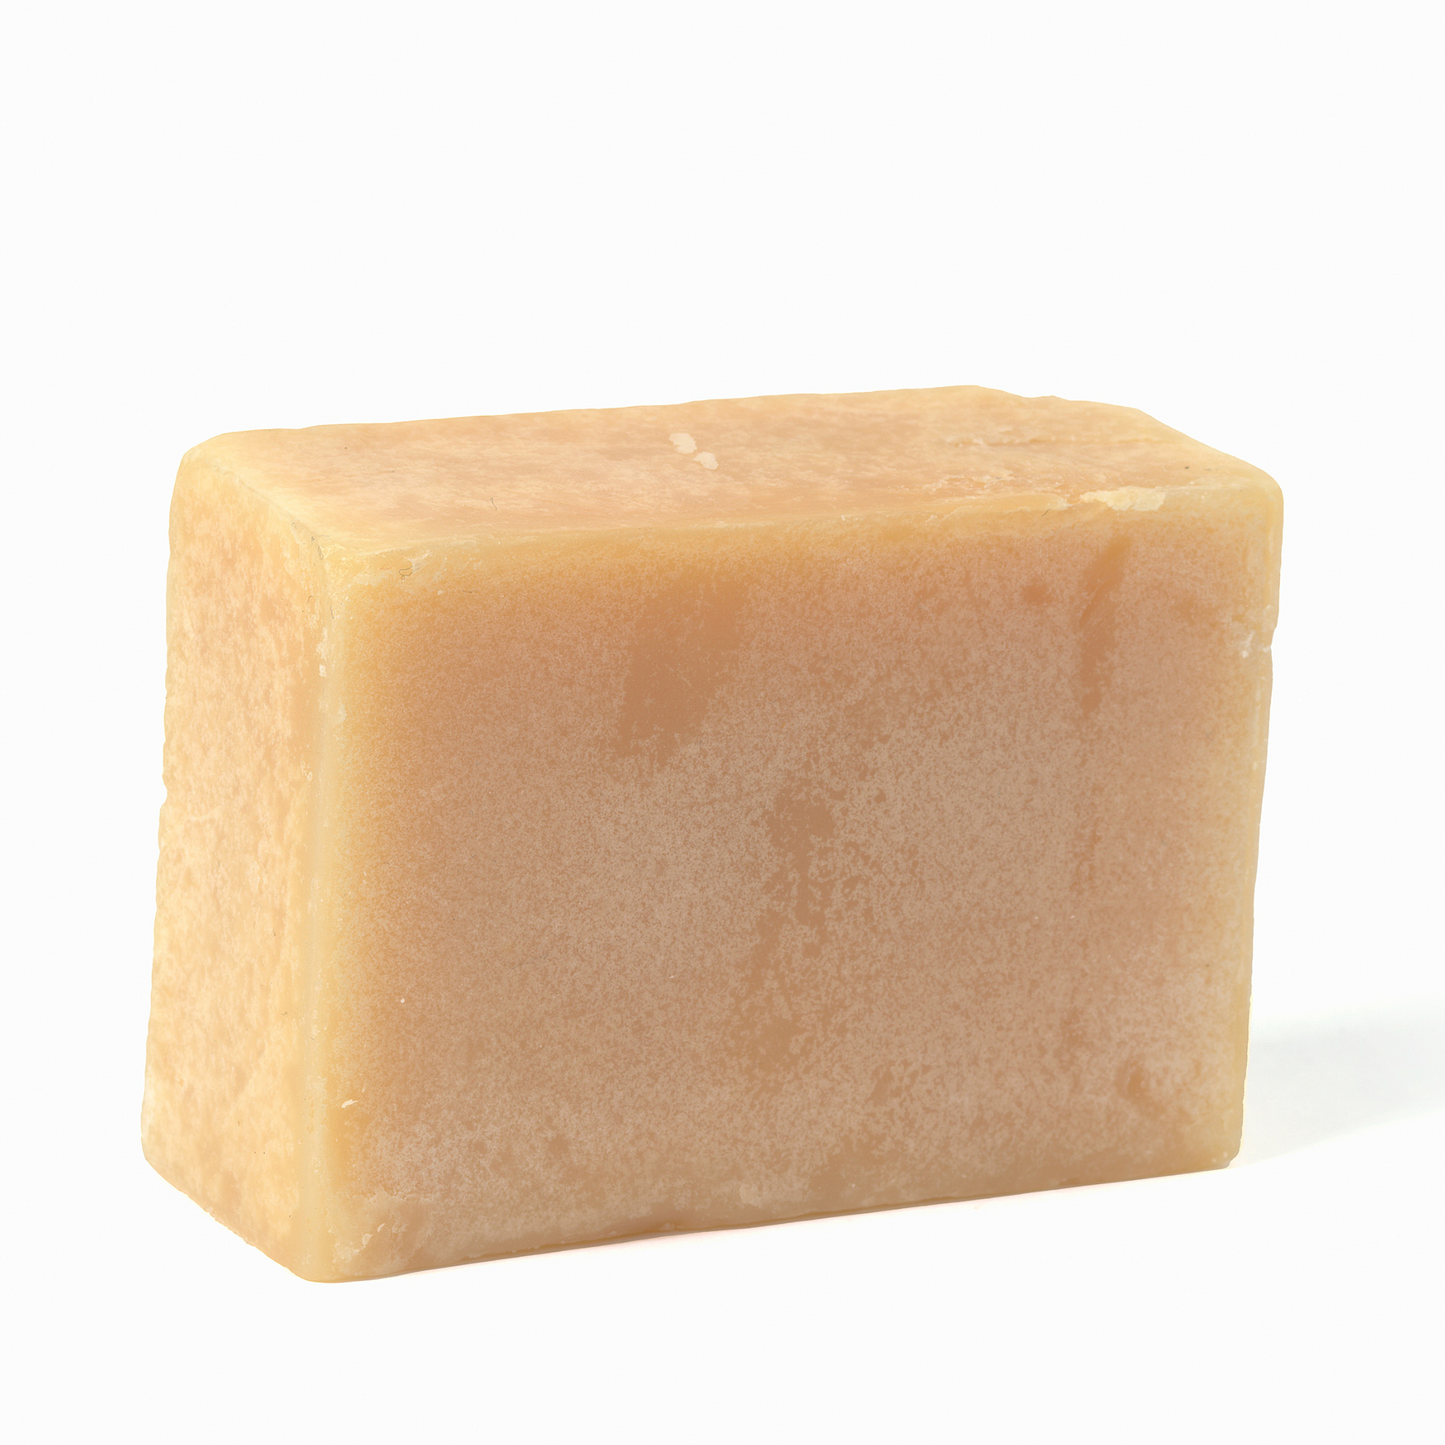 COWBOY CLEAN - HANDCRAFTED GOAT'S MILK SOAP